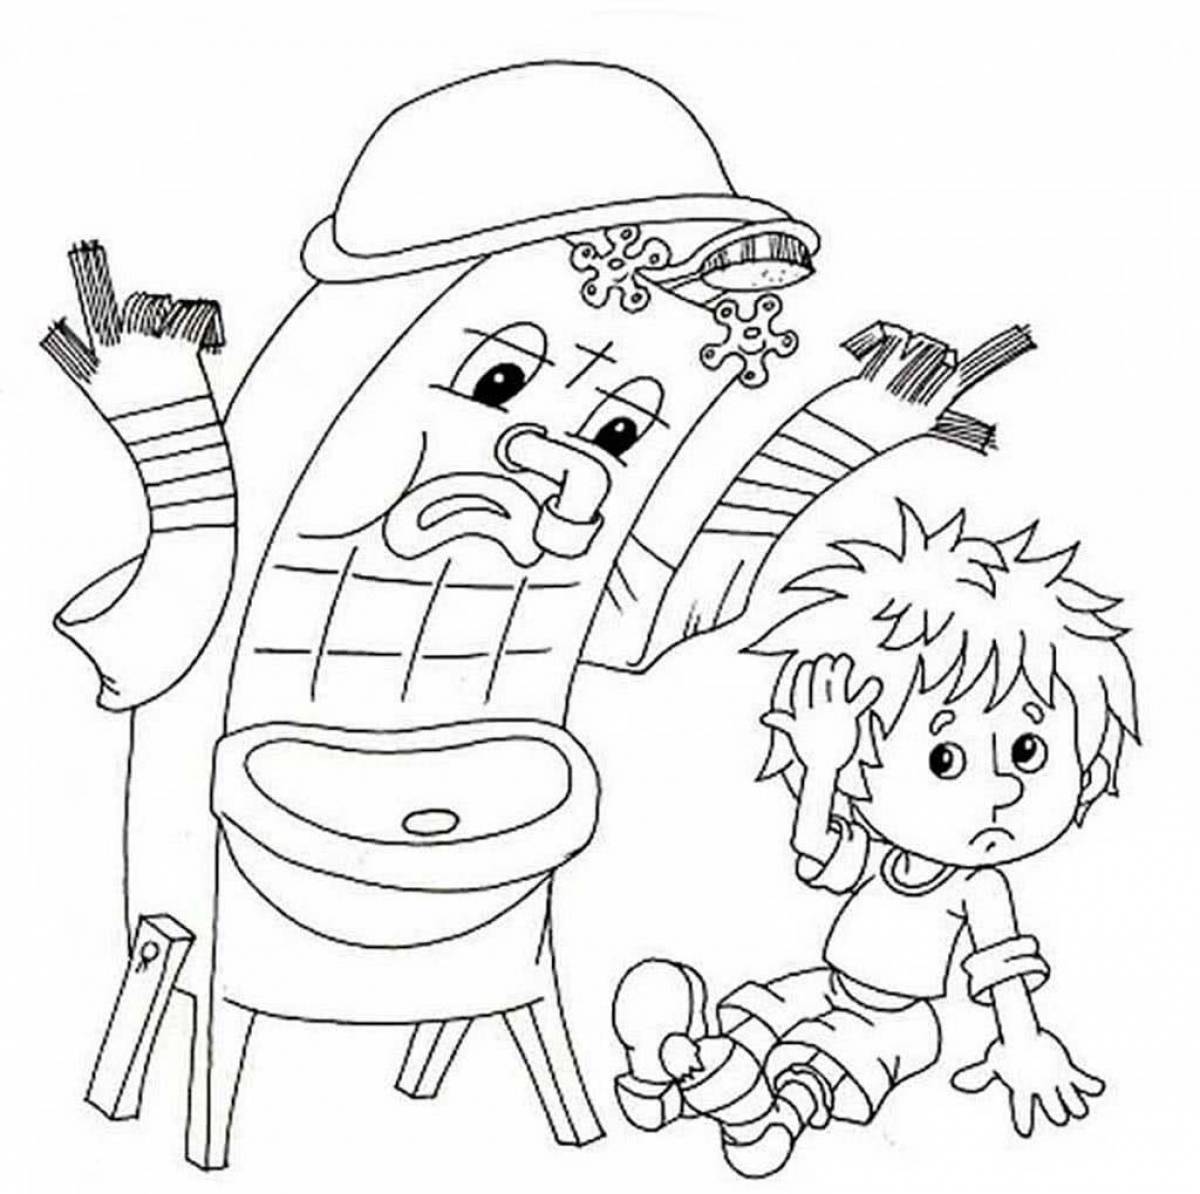 Color-creative moidodyr coloring page for children 3-4 years old